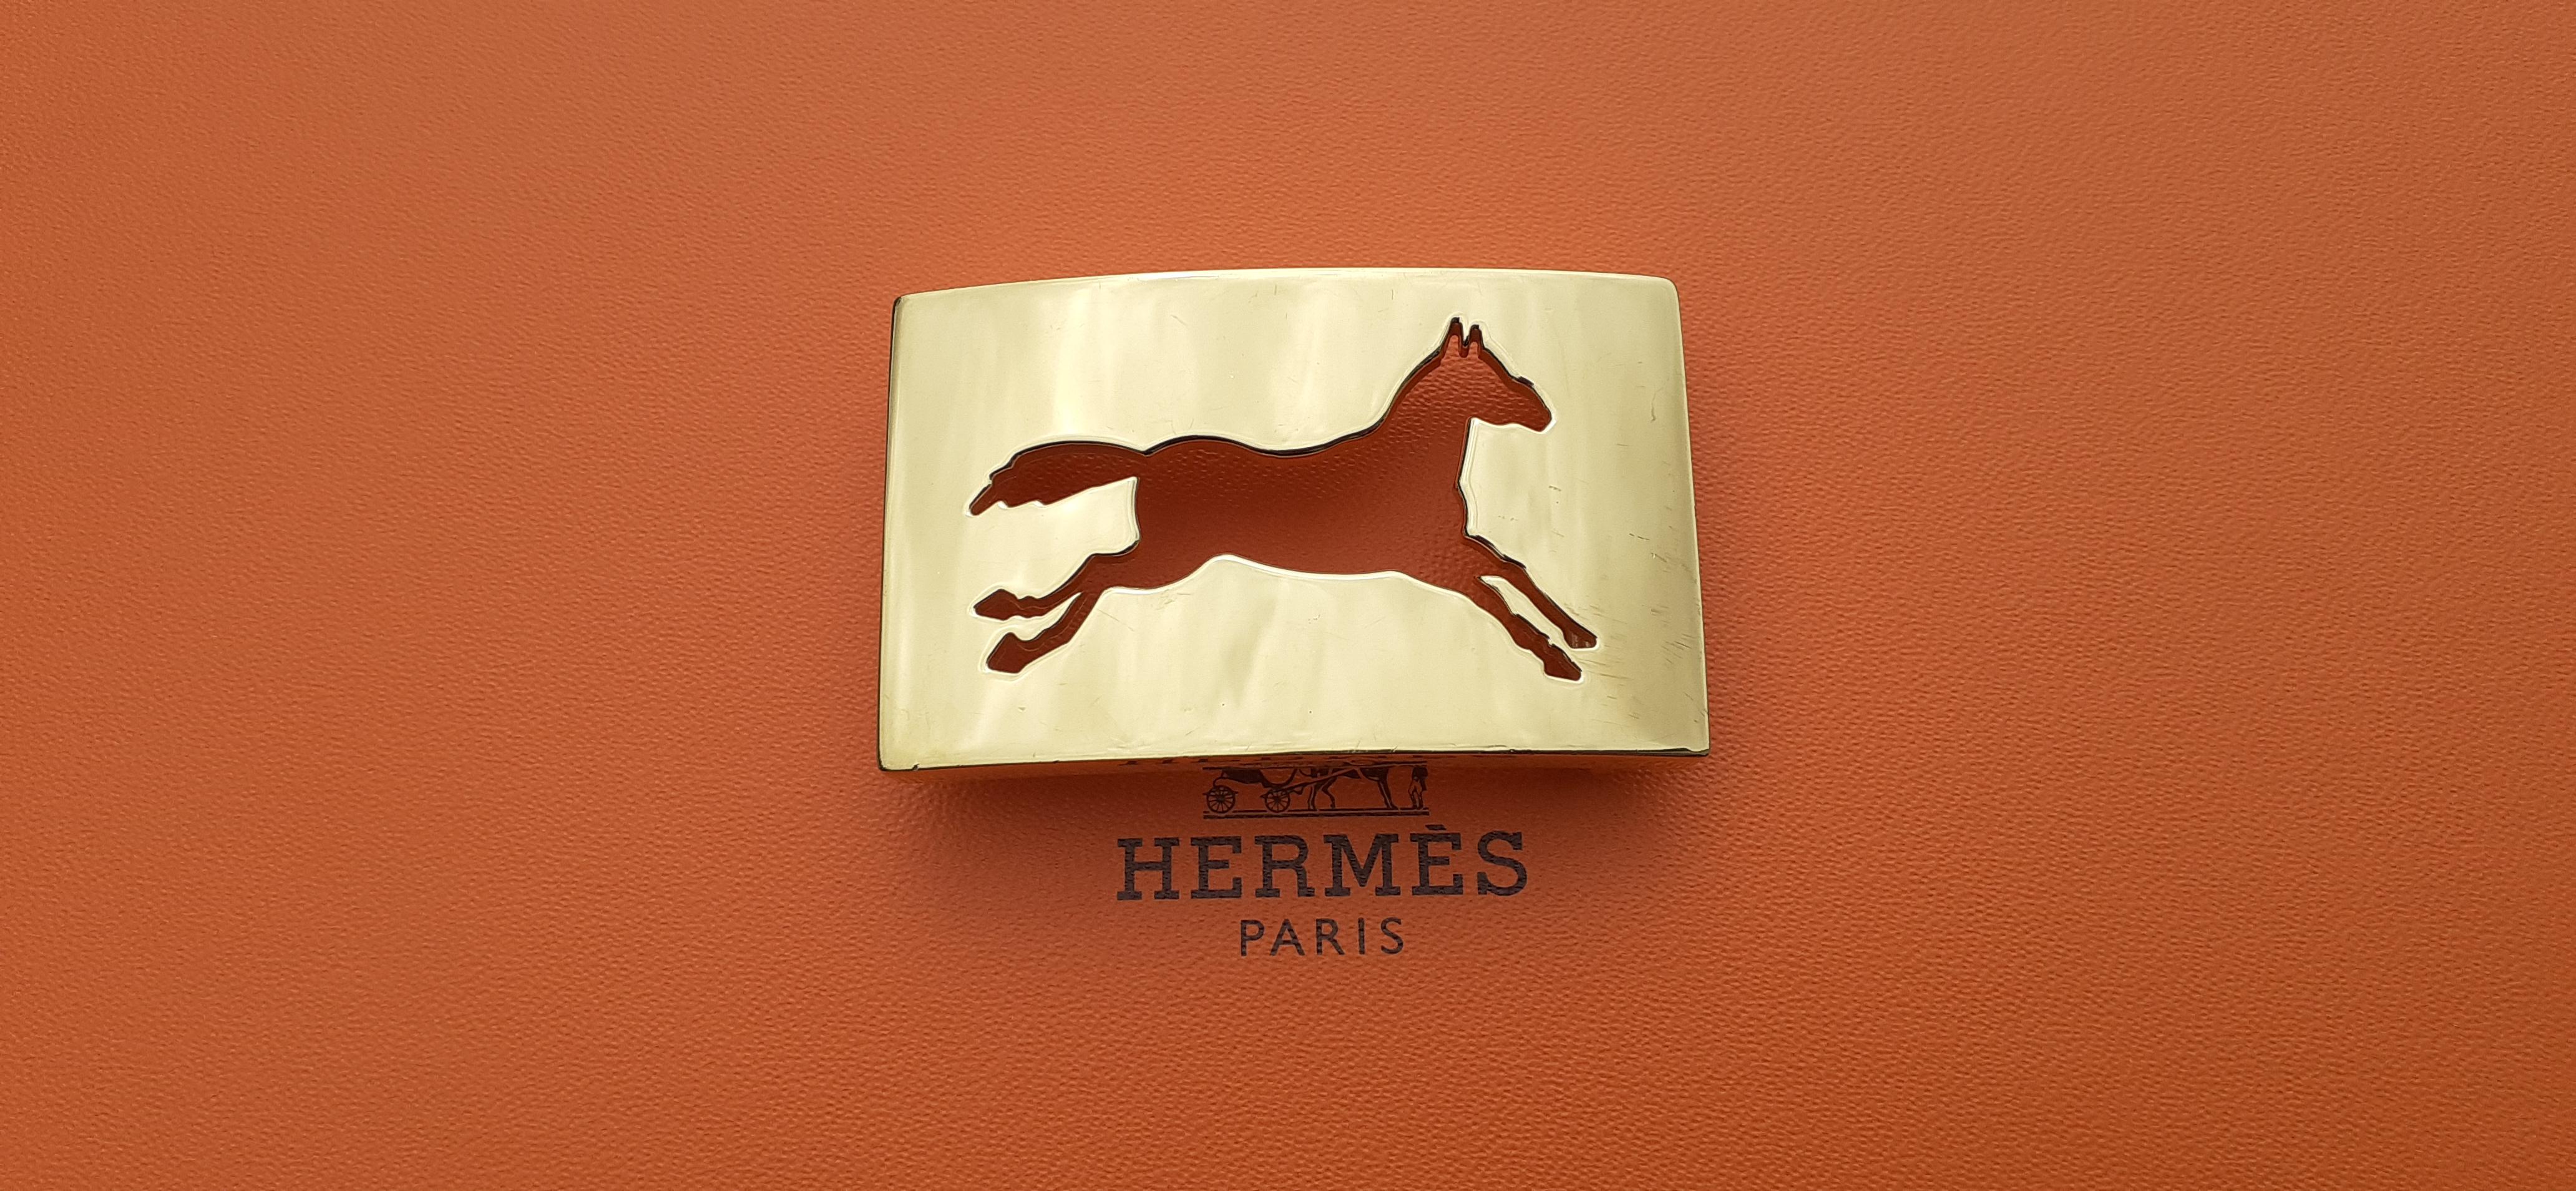 Exceptional Hermès Belt Buckle Horse Shaped in Gold for 32 mm Belt Texas 8